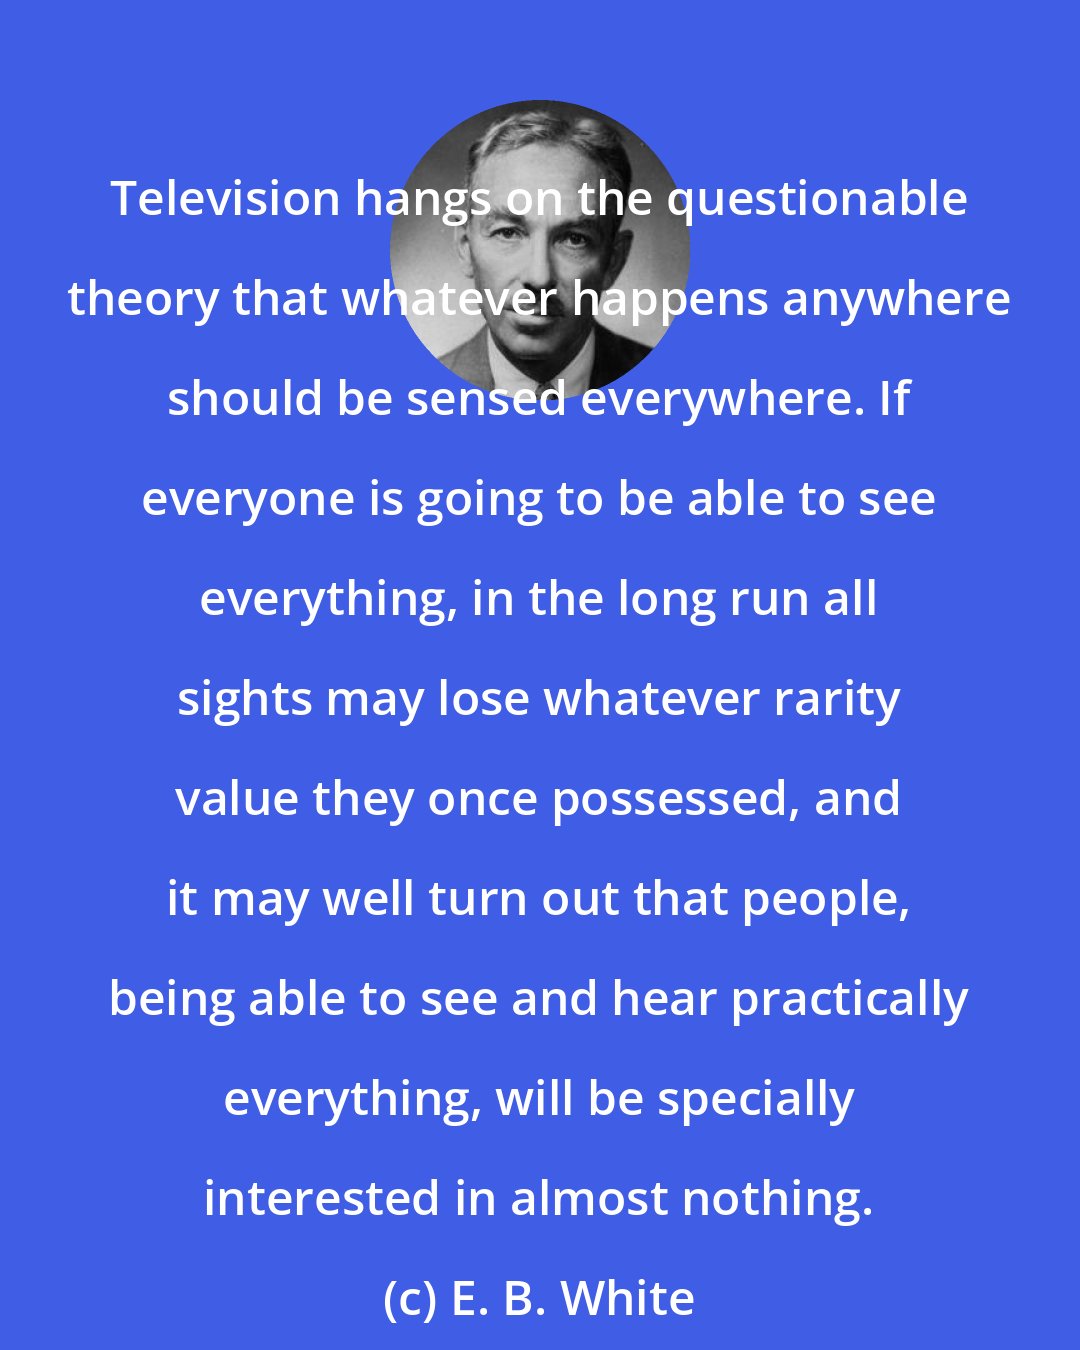 E. B. White: Television hangs on the questionable theory that whatever happens anywhere should be sensed everywhere. If everyone is going to be able to see everything, in the long run all sights may lose whatever rarity value they once possessed, and it may well turn out that people, being able to see and hear practically everything, will be specially interested in almost nothing.